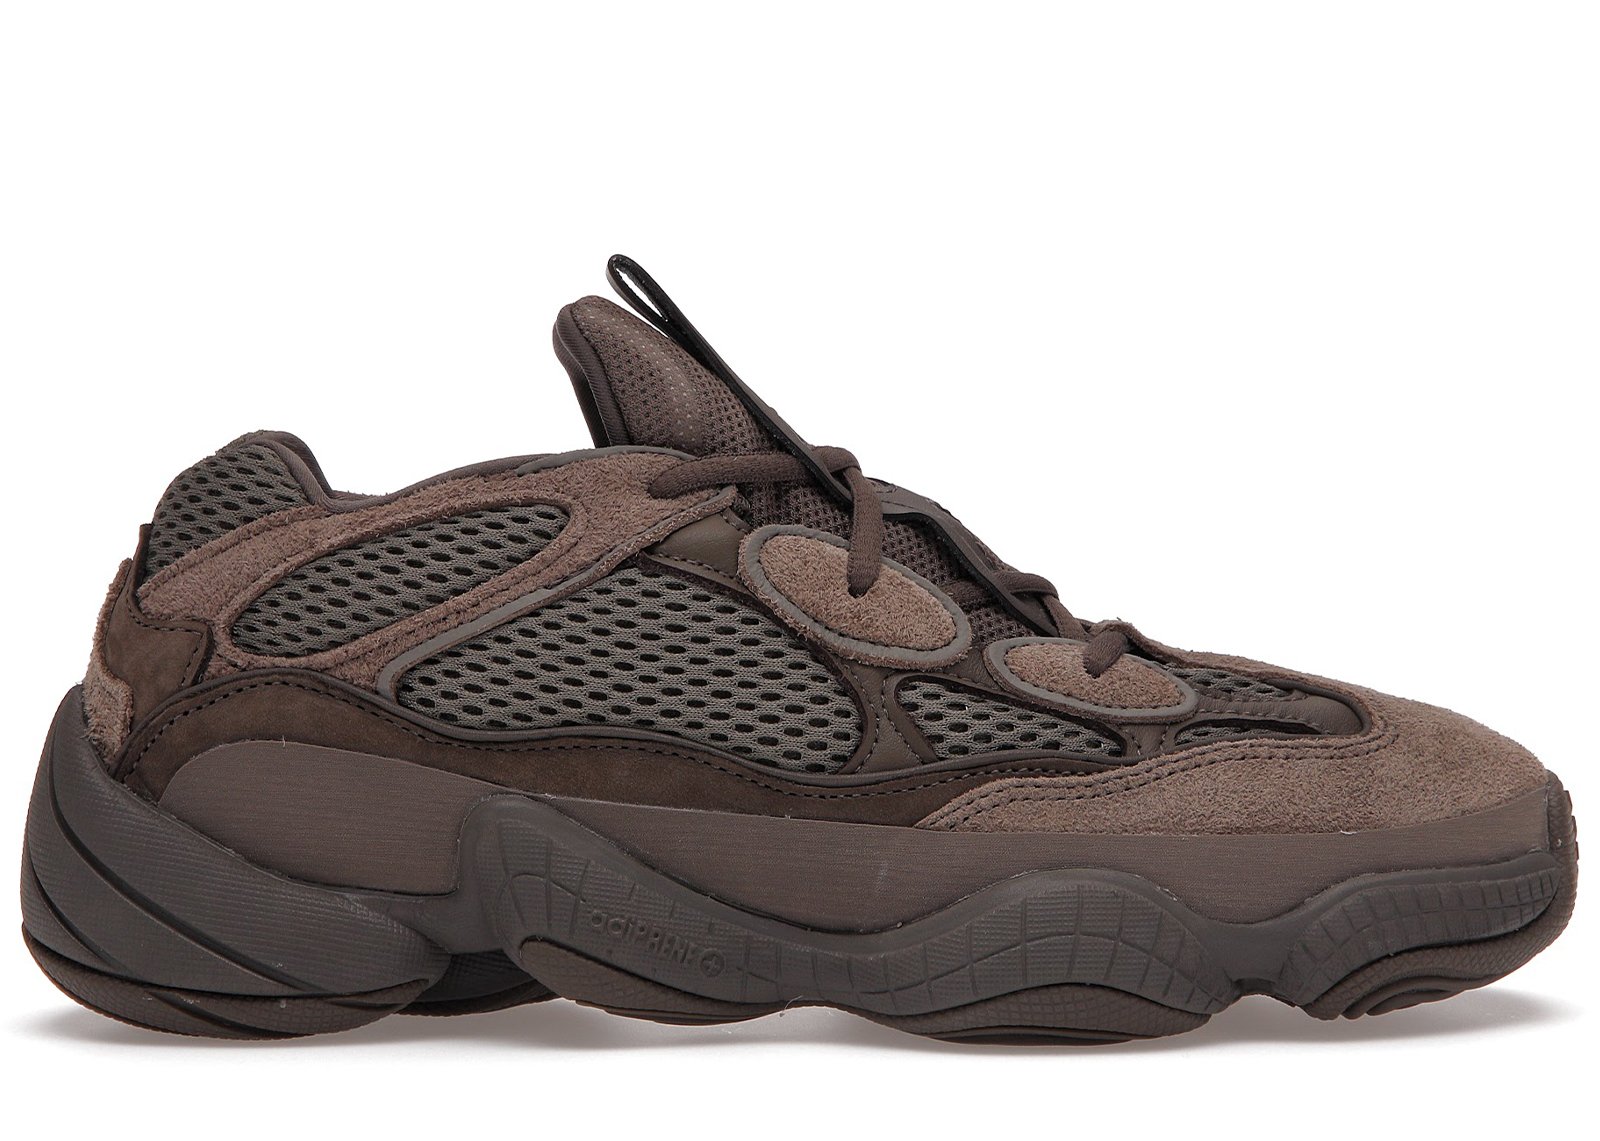 adidas Yeezy 500 Clay Brown sneakers